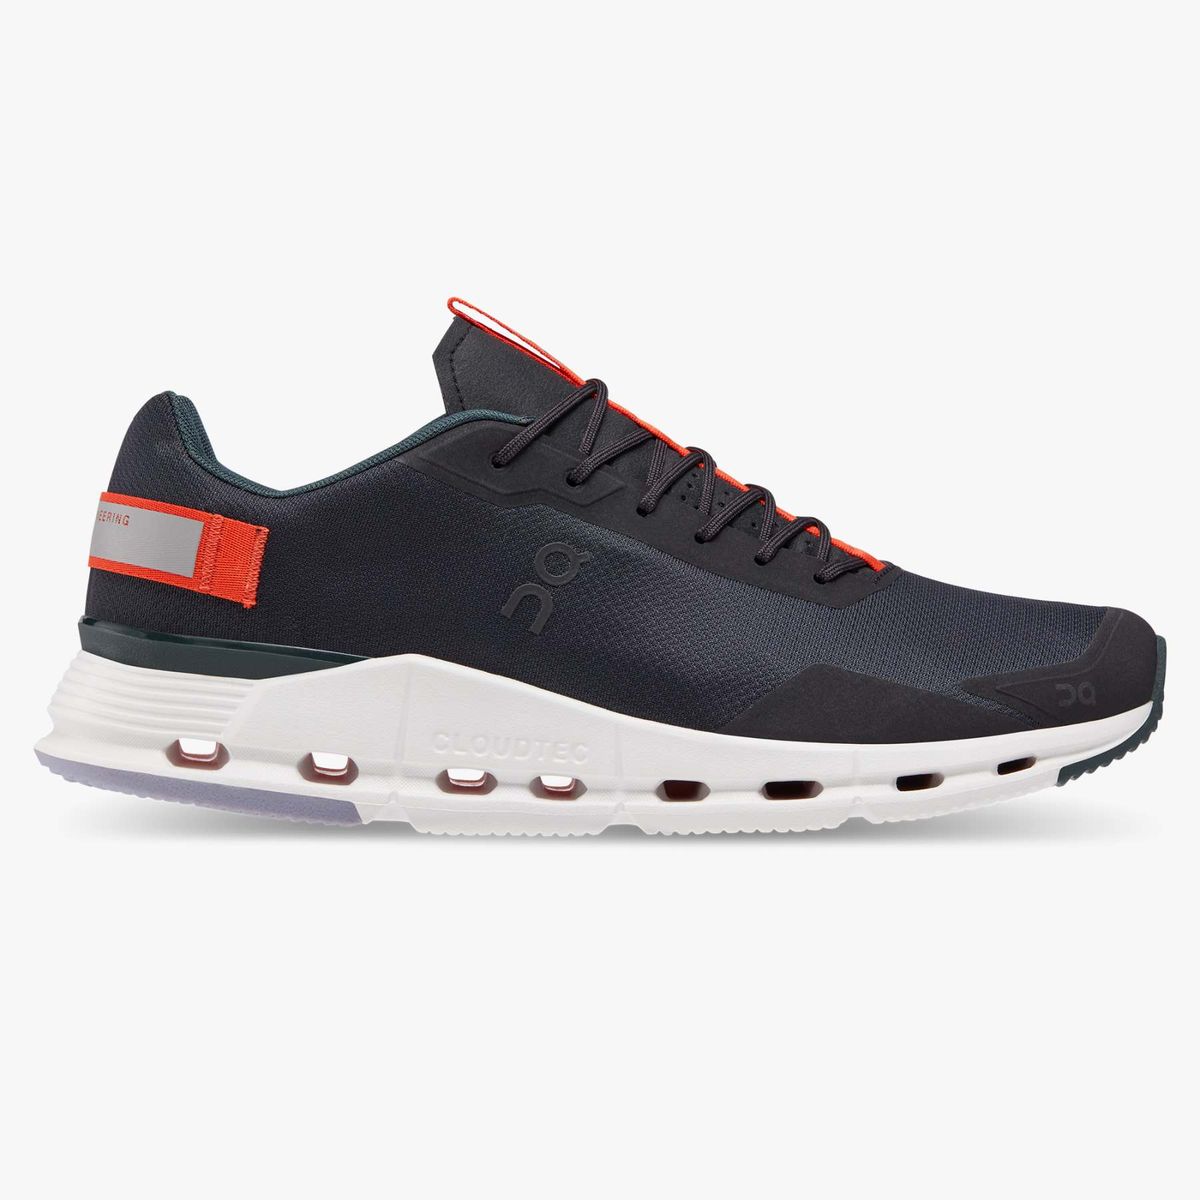 cloud-nova-form-shoes-black-flame-buy-online-in-south-africa